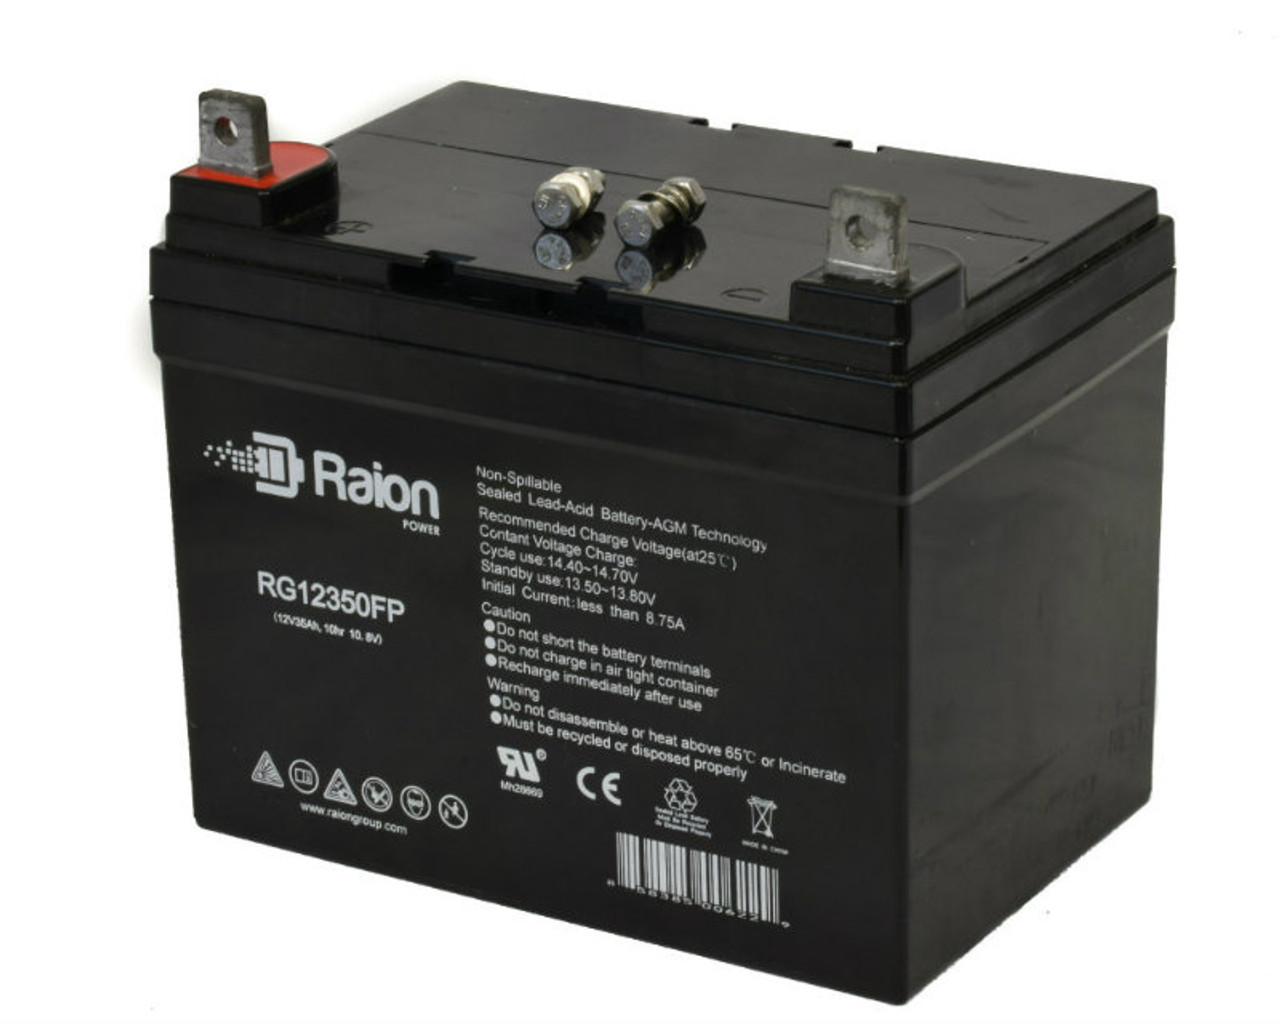 Raion Power Replacement 12V 35Ah RG12350FP Battery for J.I. Case & Case Ih Lawn 646